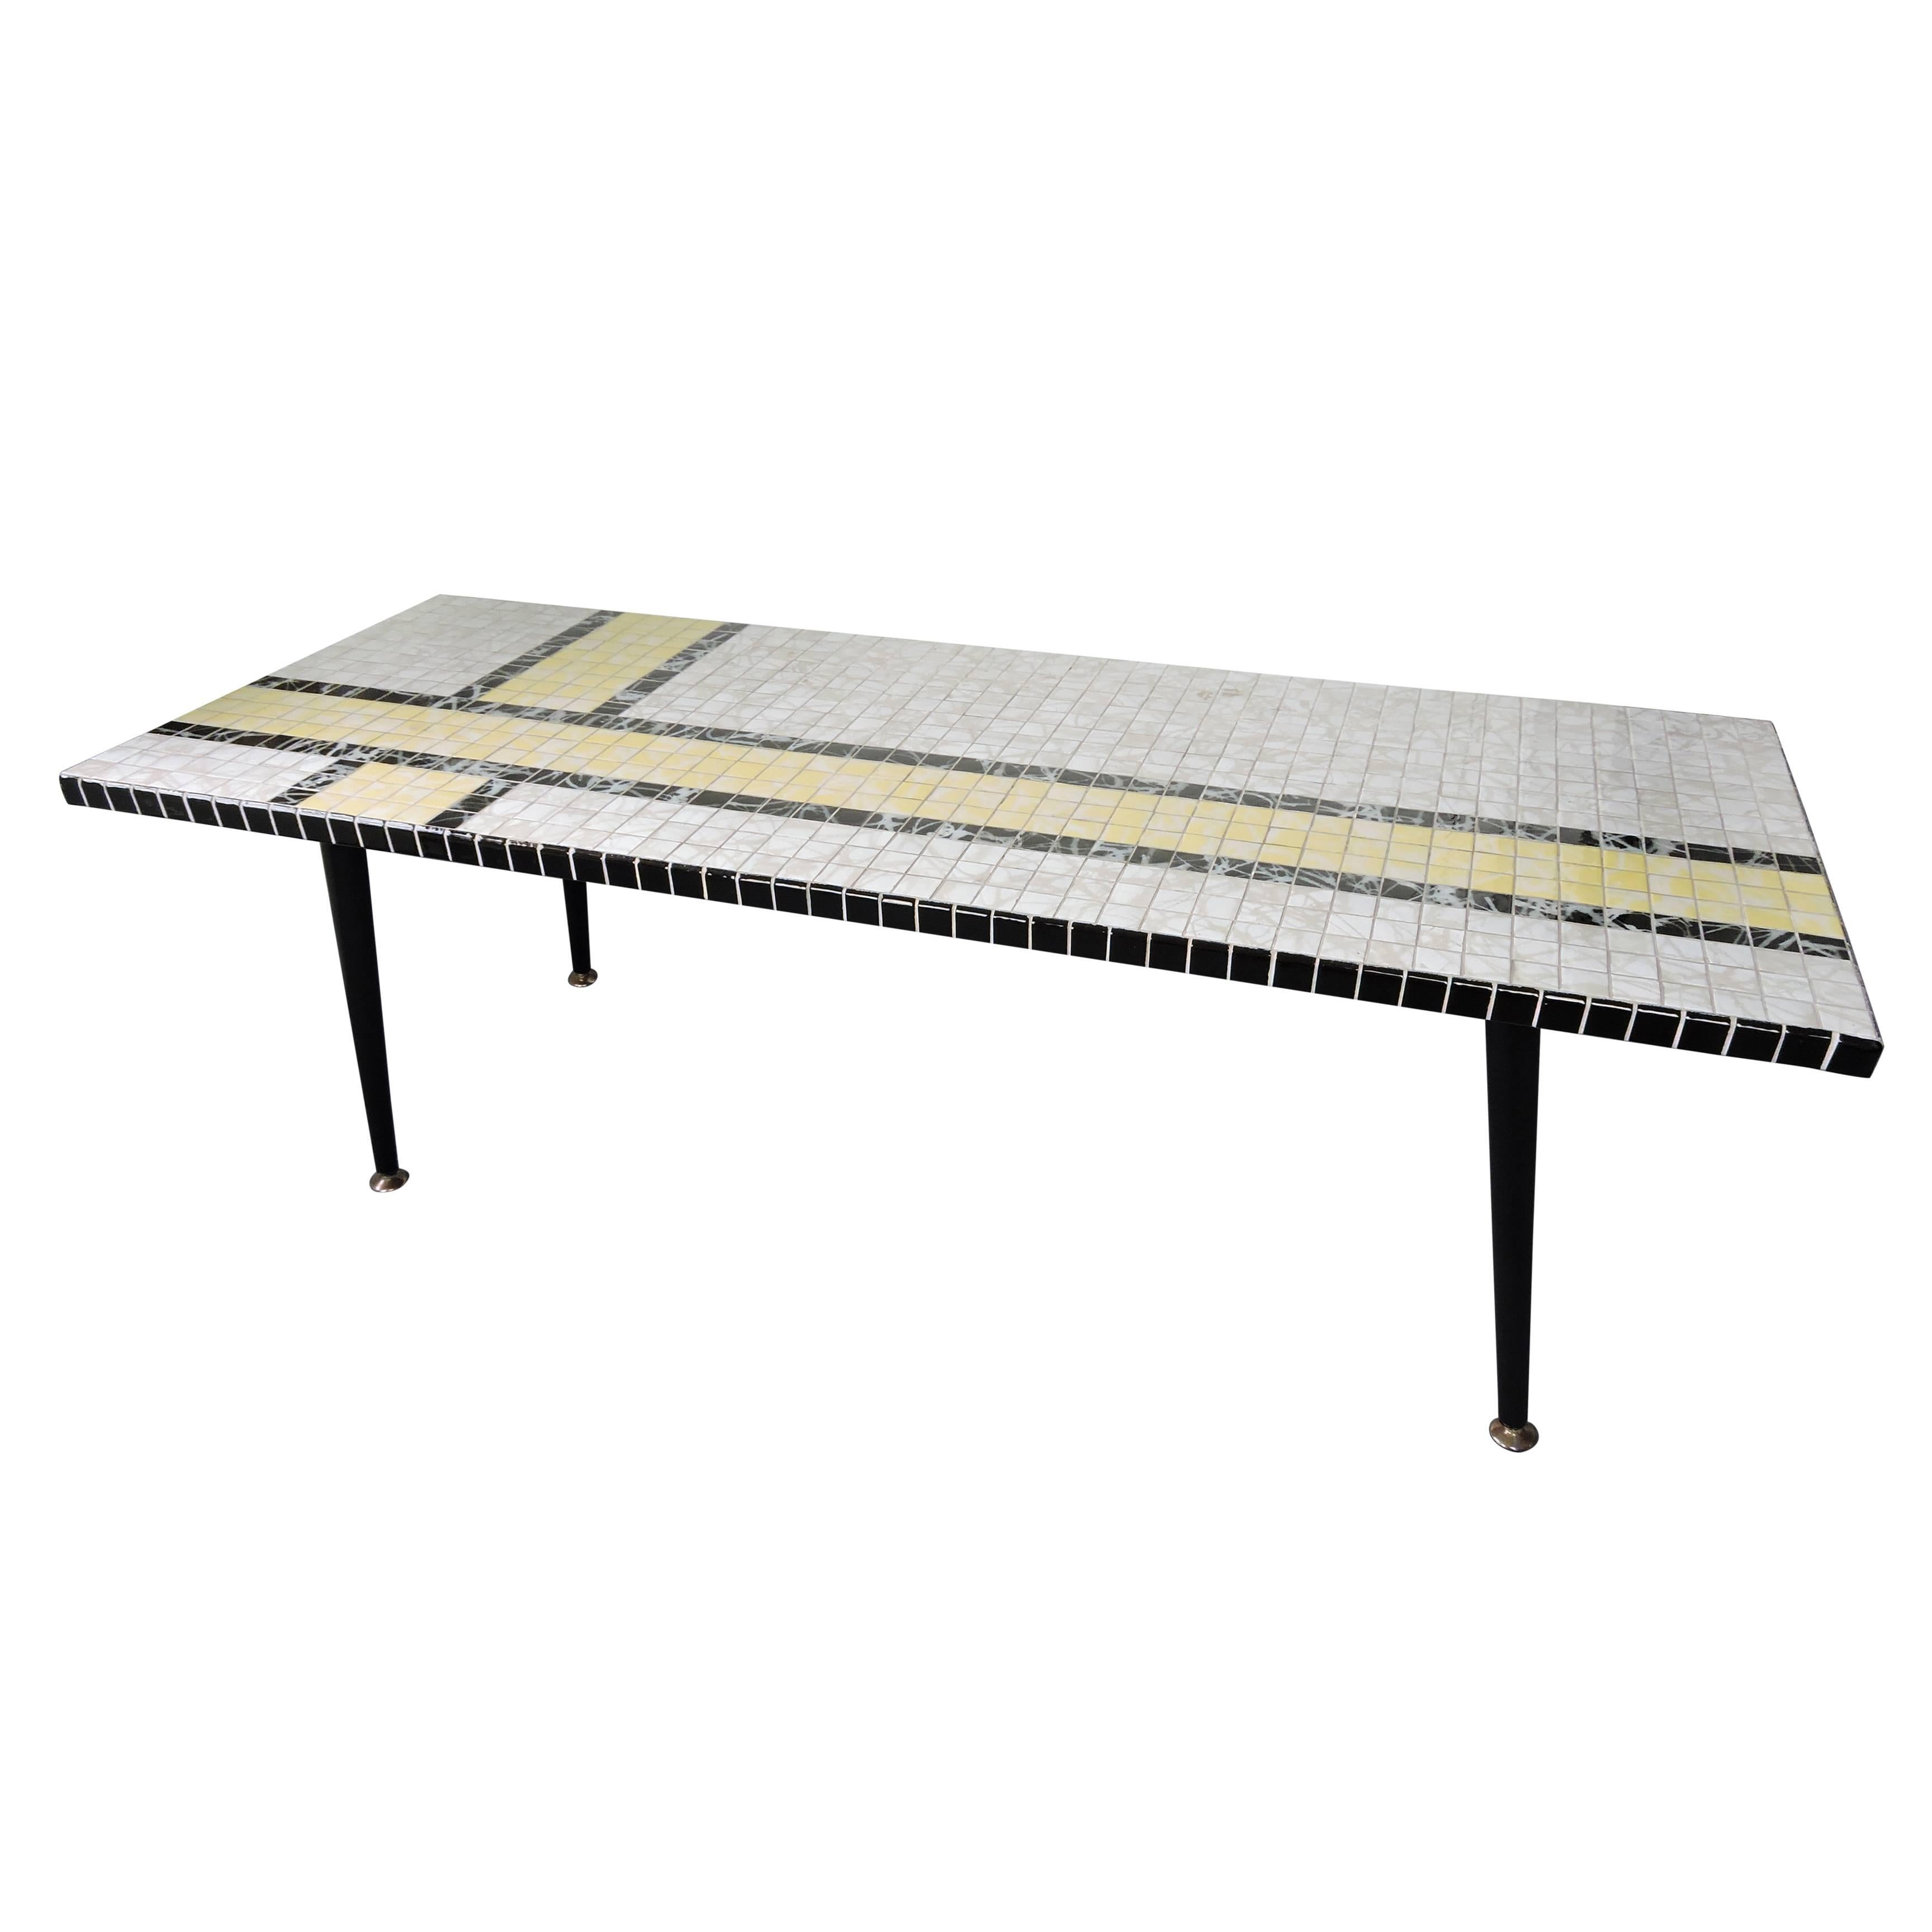 A Mid-Century coffee table featuring black, white and yellow ceramic tiles.